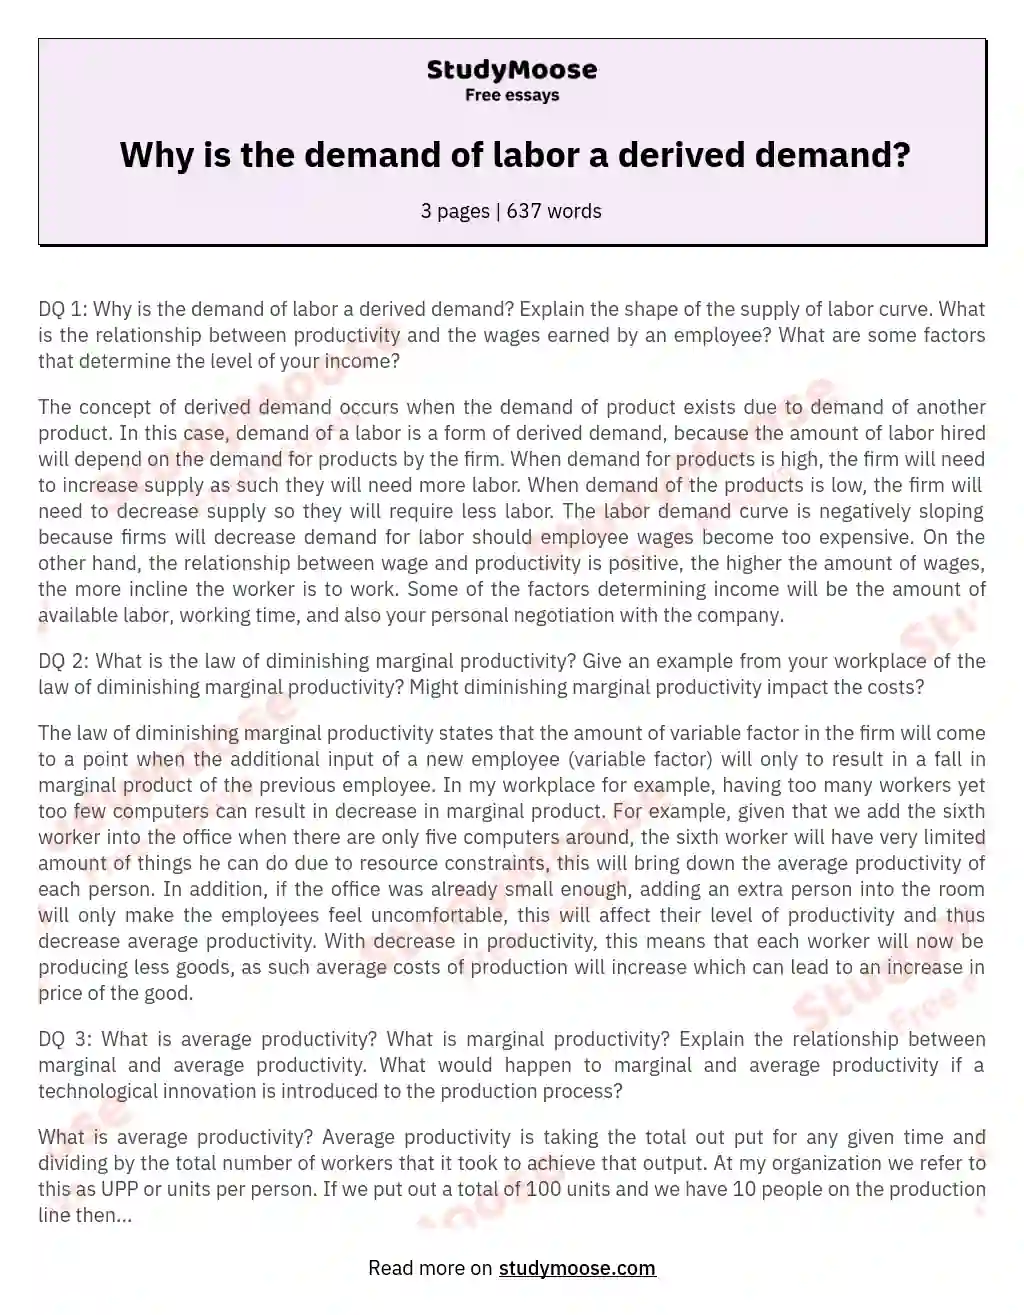 Labor Demand, Productivity, and Wages: A Comprehensive Analysis essay